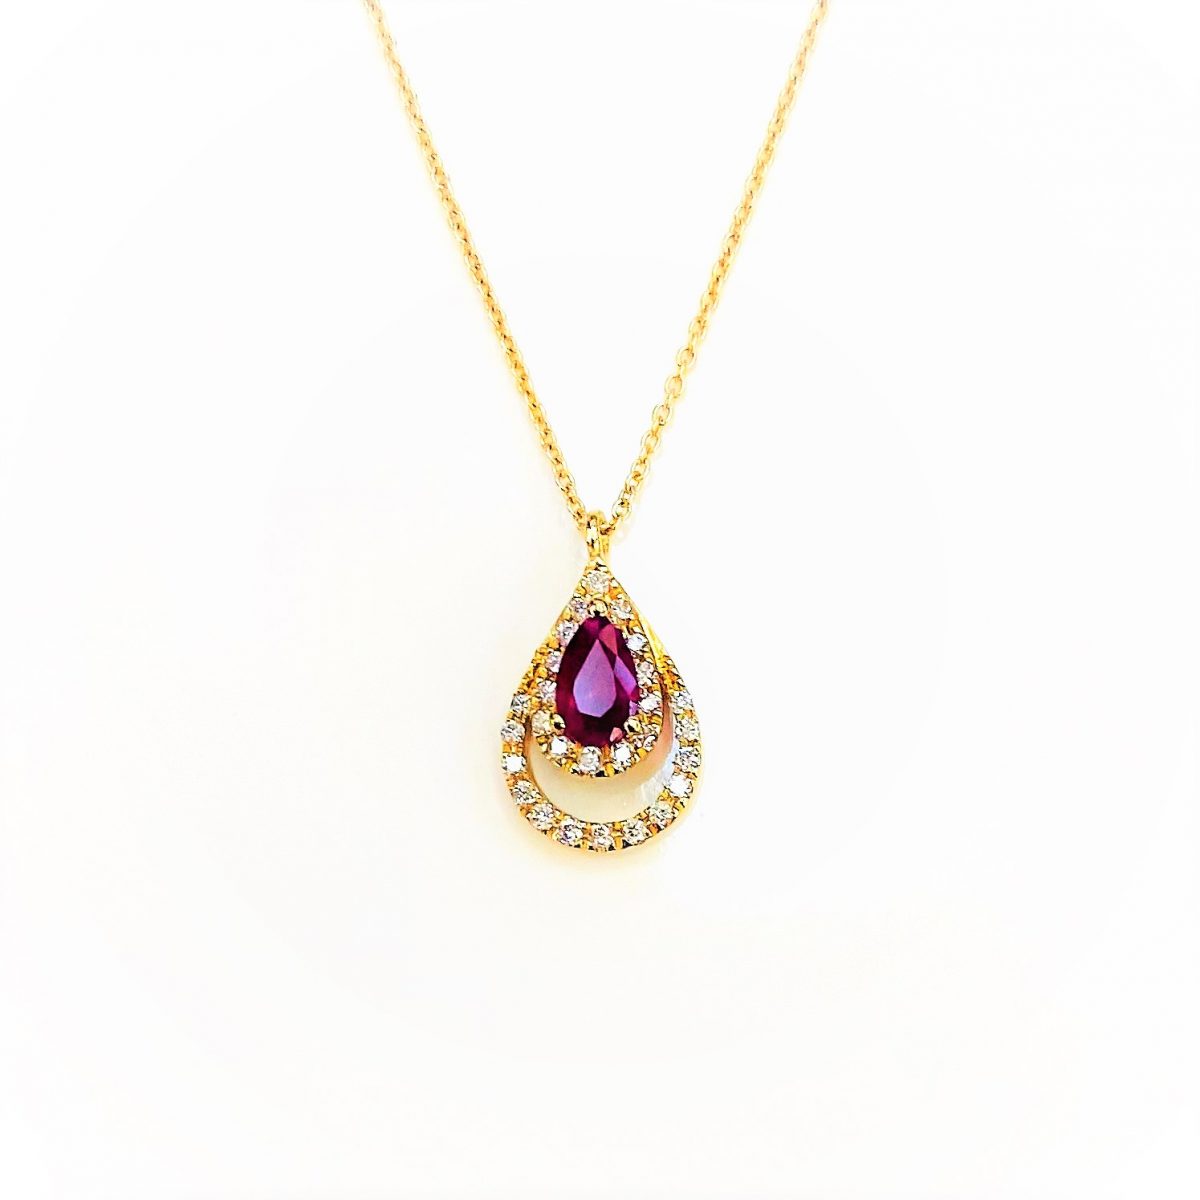 Necklace with Ruby & Diamonds